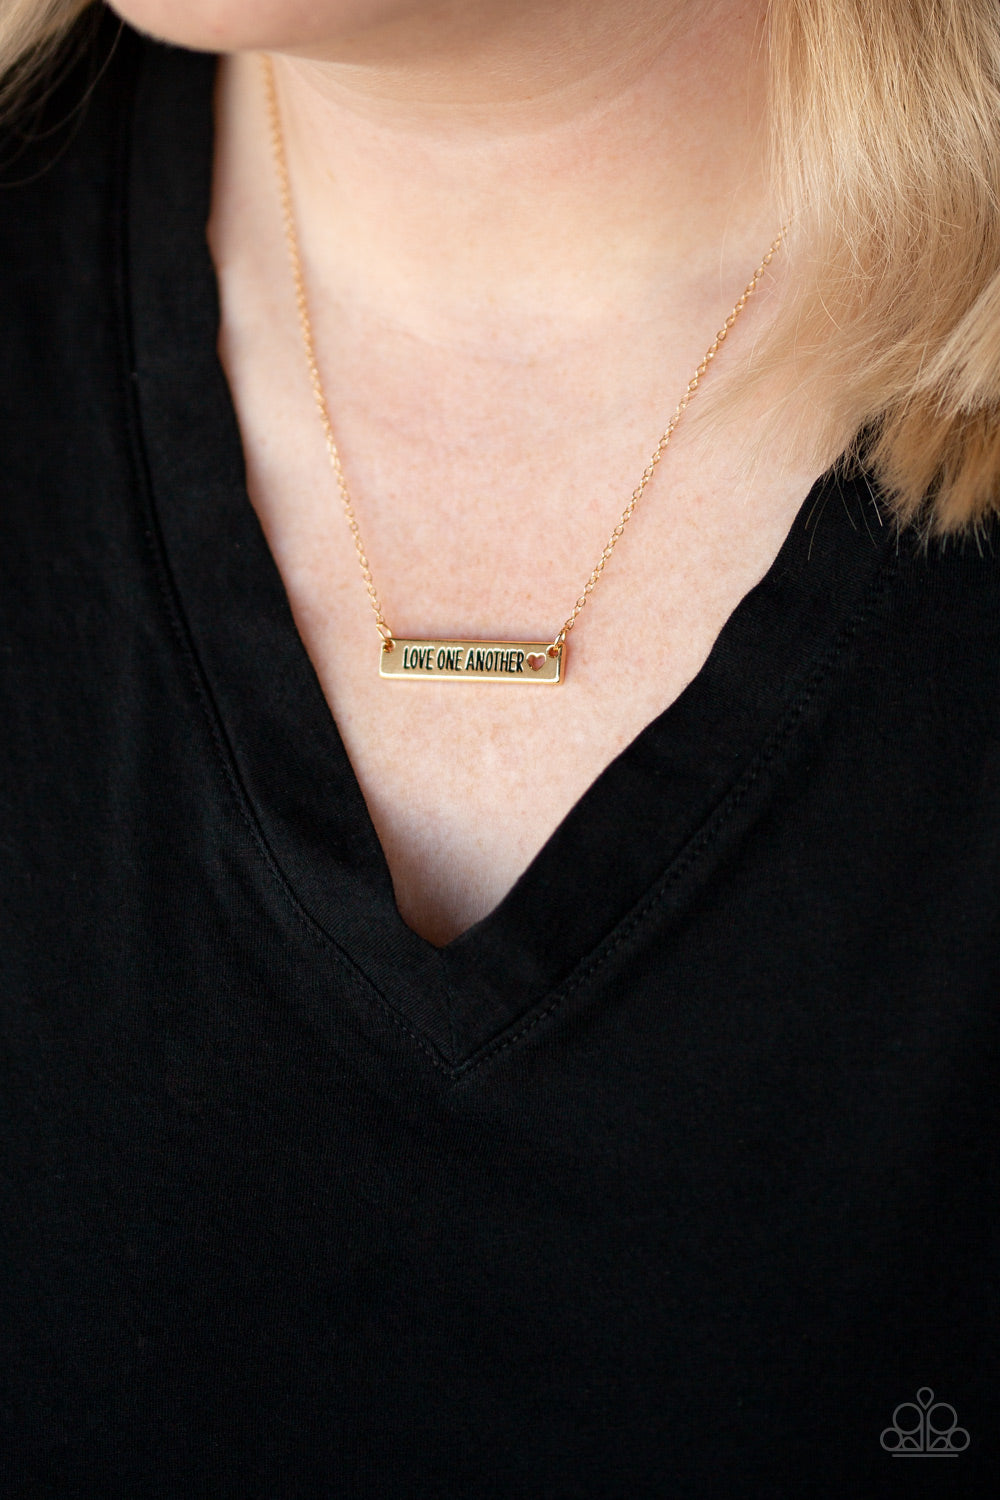 Paparazzi Necklaces - Love One Another - Gold